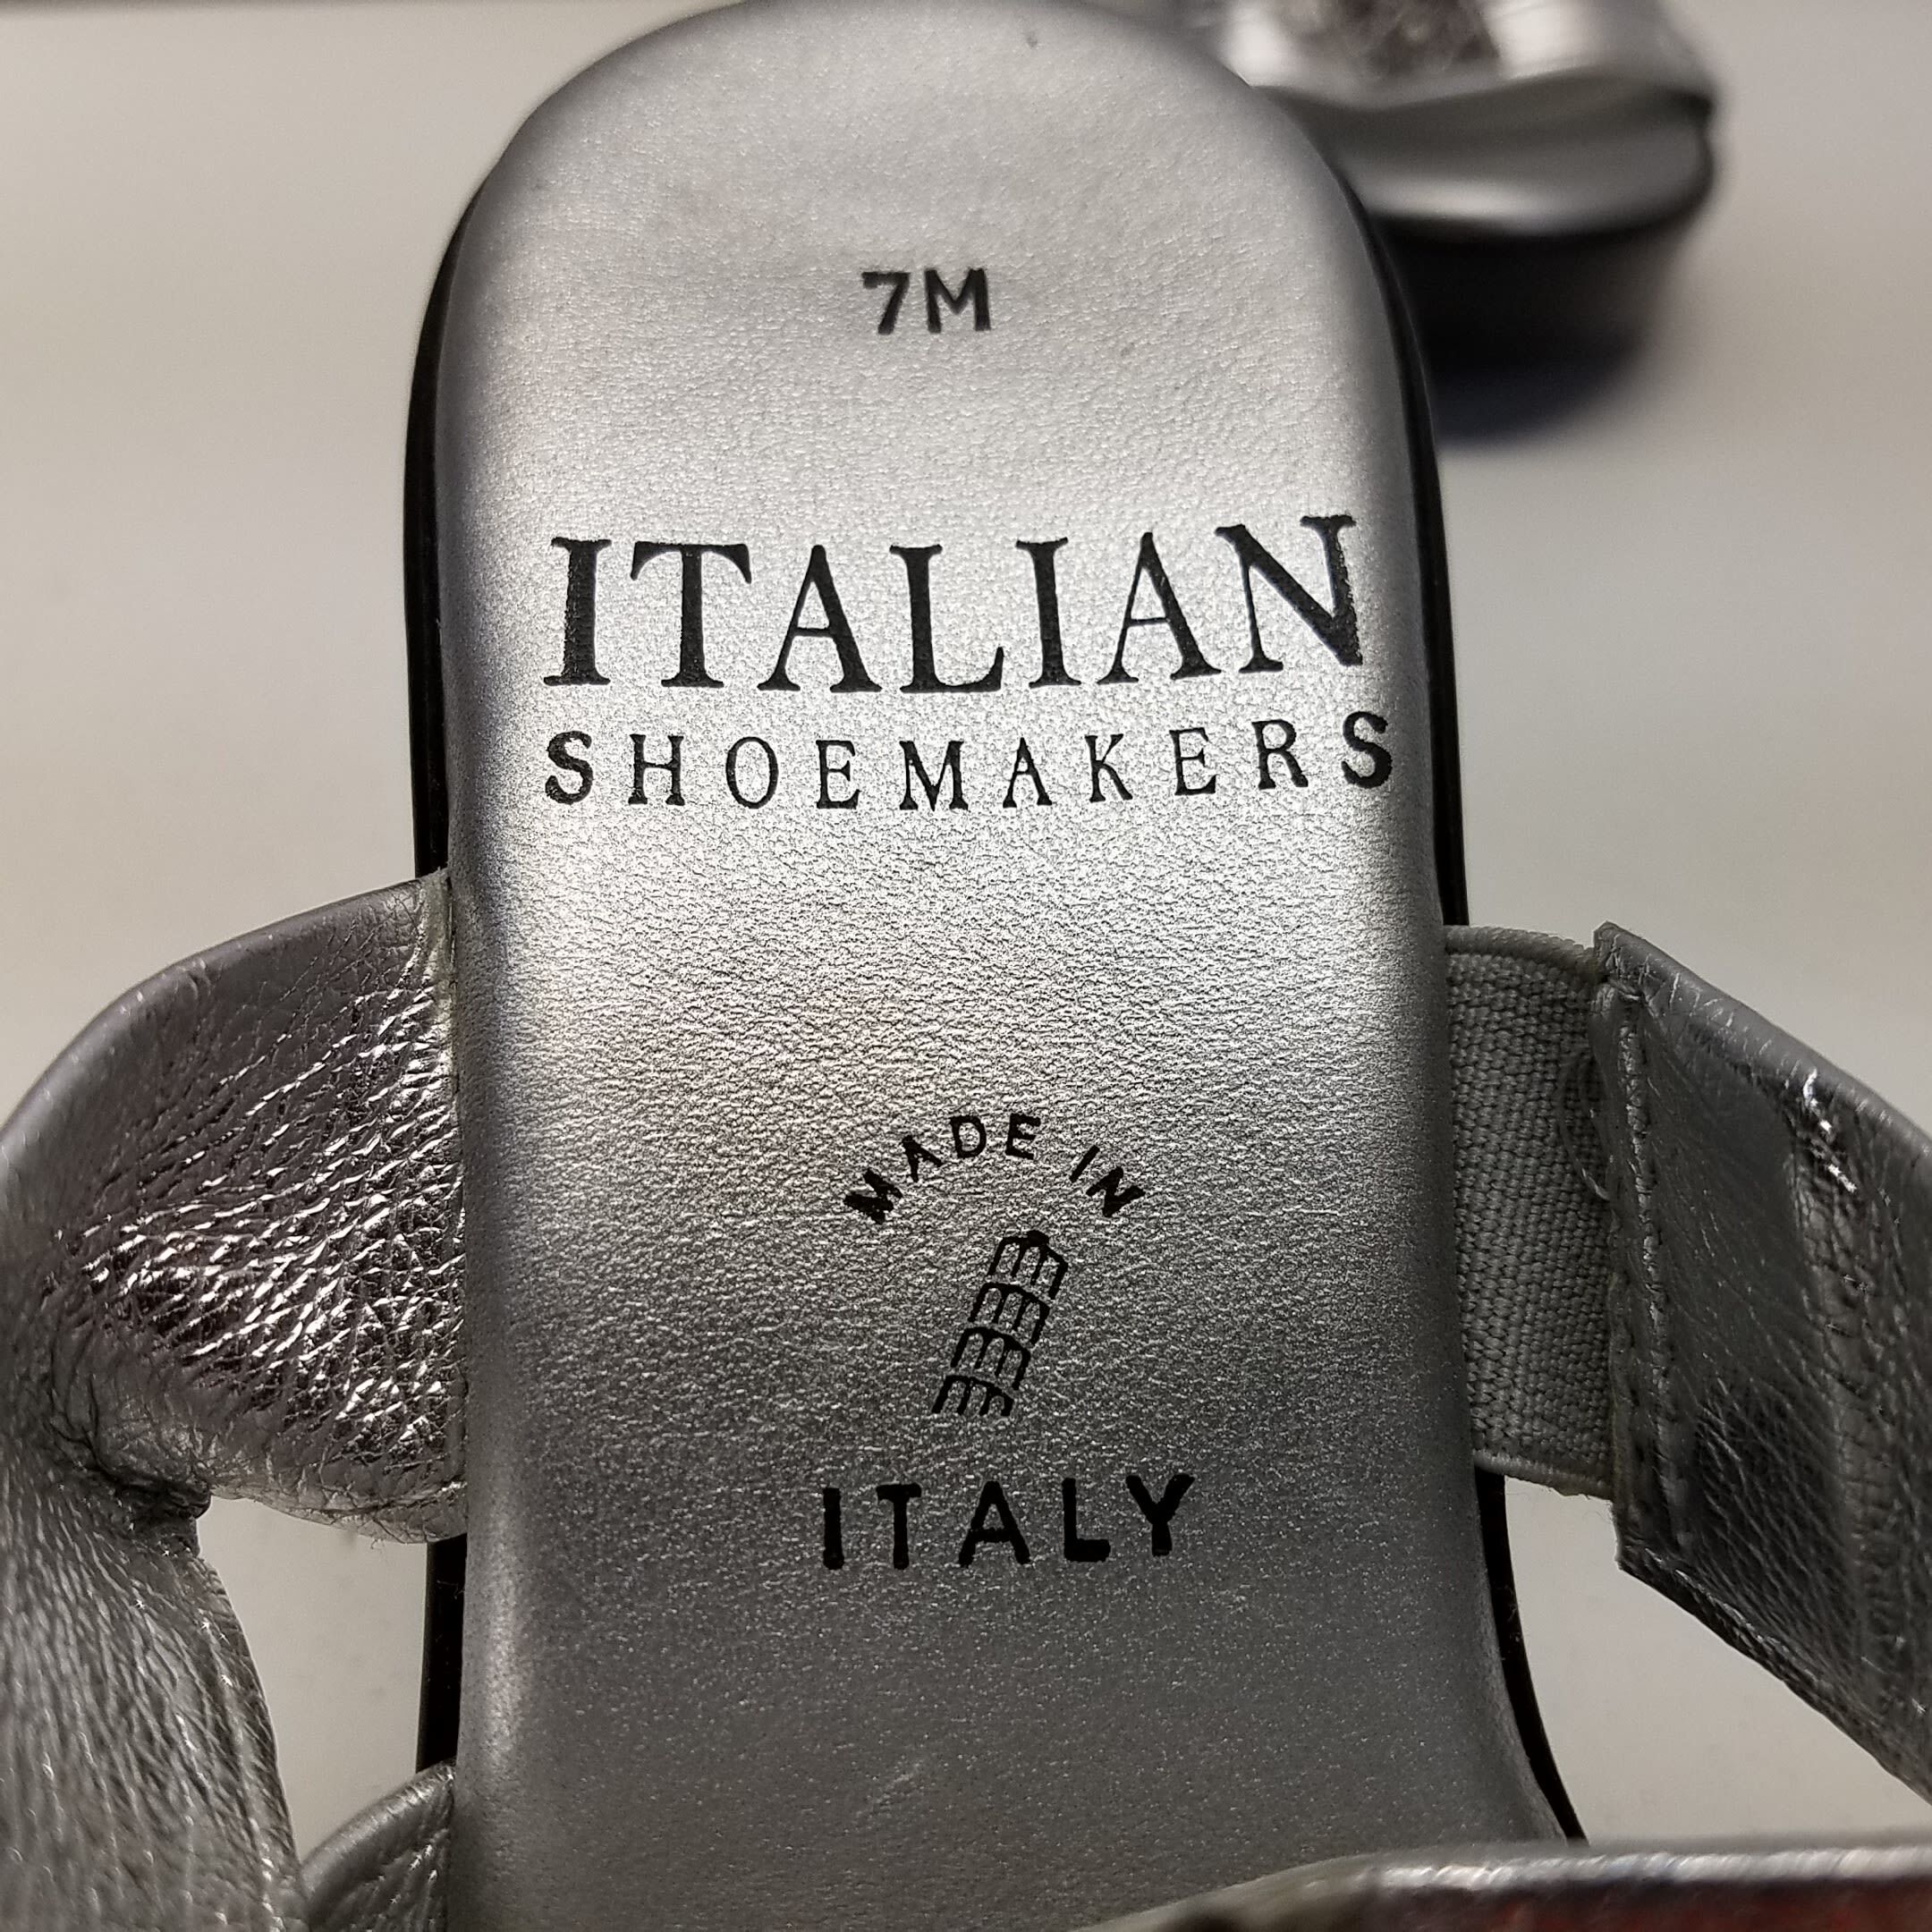 In the mid-1950's, Italian shoemakers were selling 